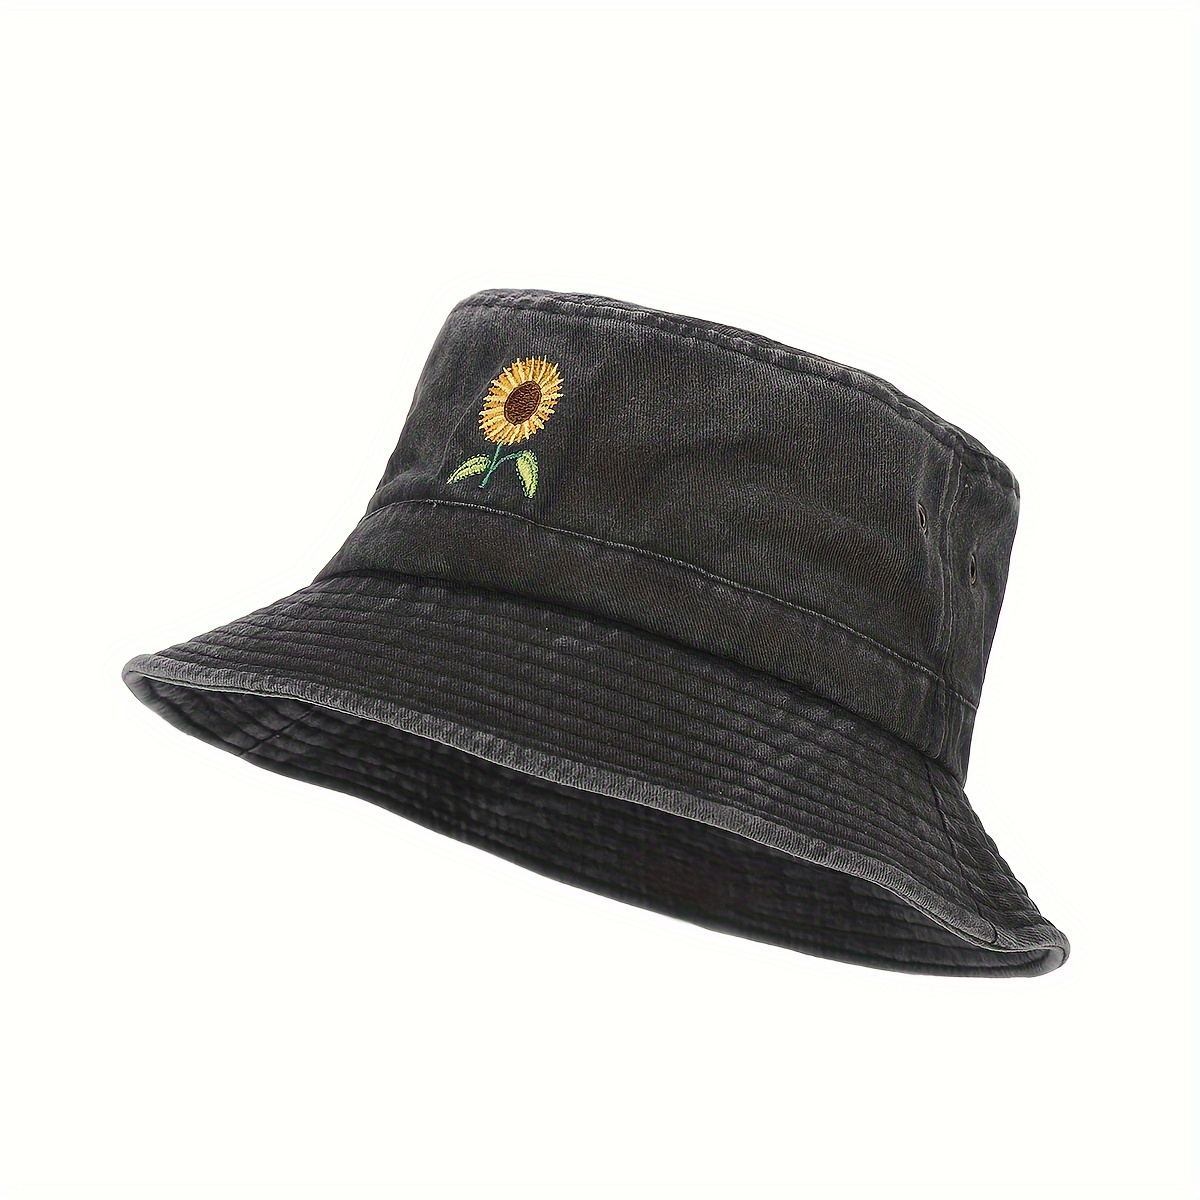 

Cool Classic Fresh Distressed Bucket Hat, Embroidery Sunflower Versatile Black Fisherman Hat, Sun Hat For Casual Leisure Outdoor Sports